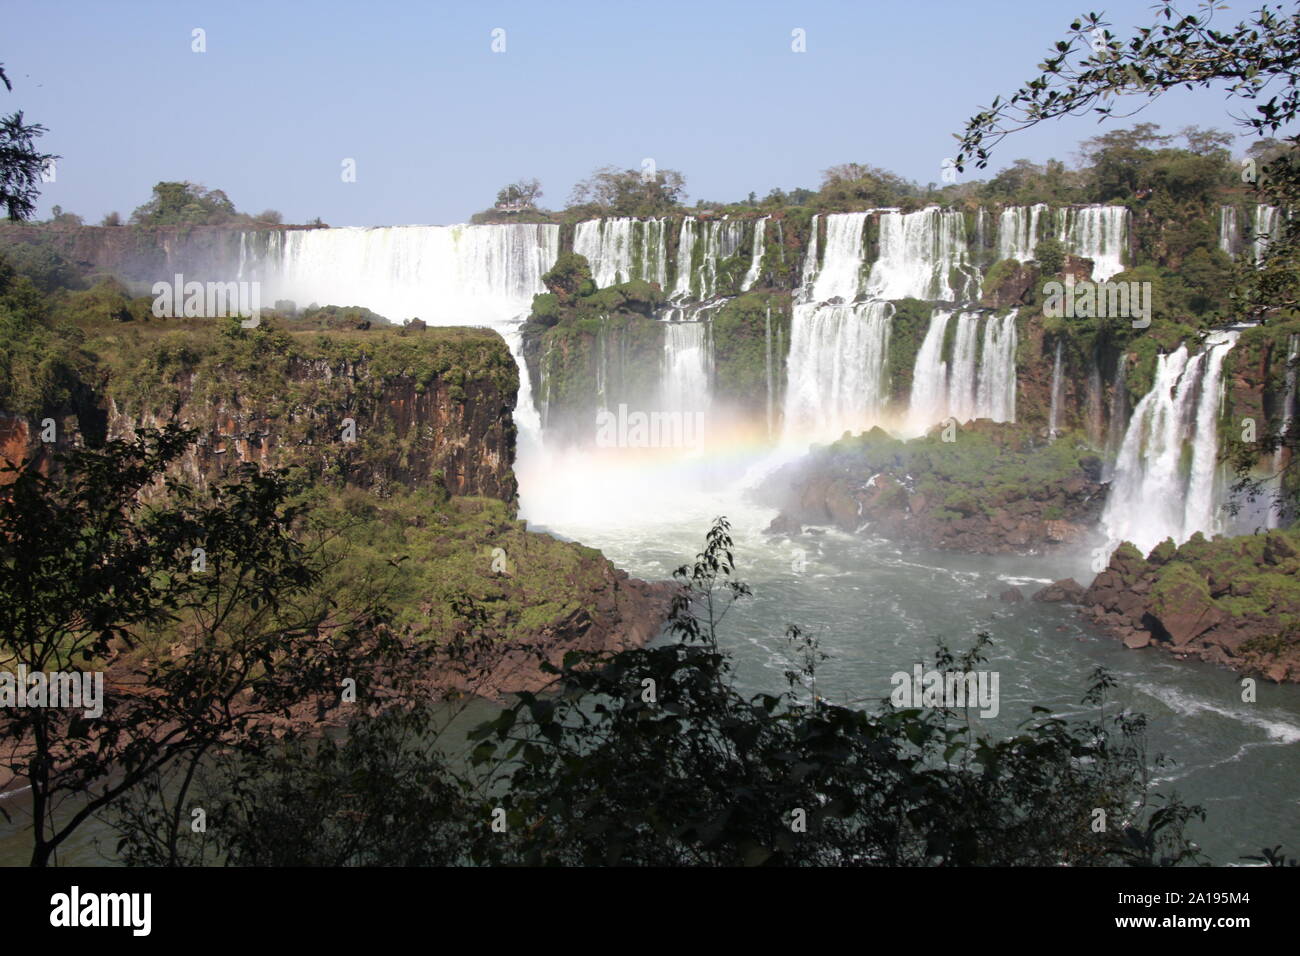 A View of the Iguazu Falls from Argentina Stock Photo